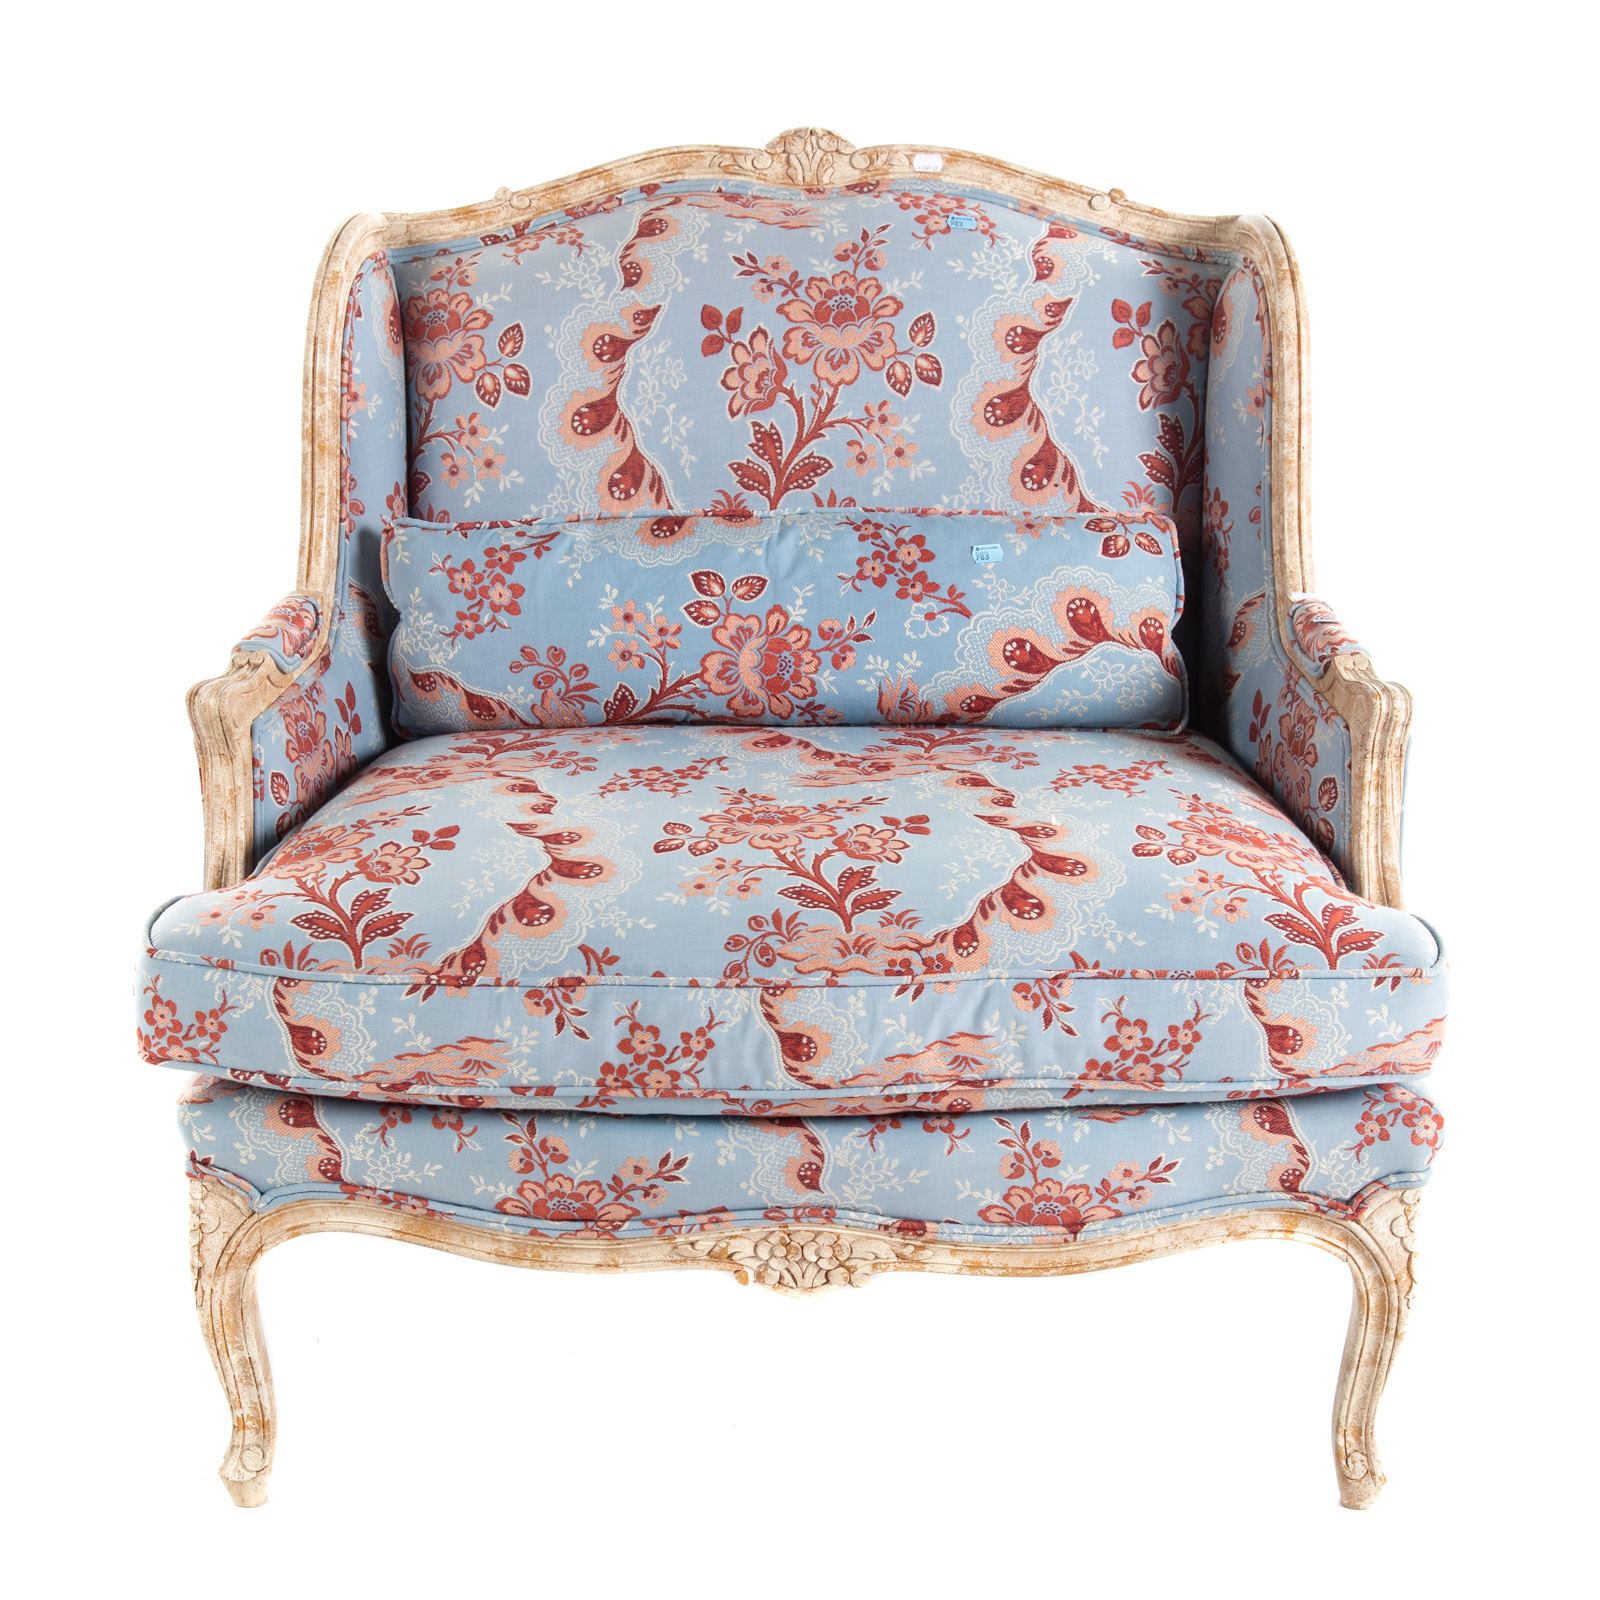 LOUIS XV STYLE UPHOLSTERED ARMCHAIR